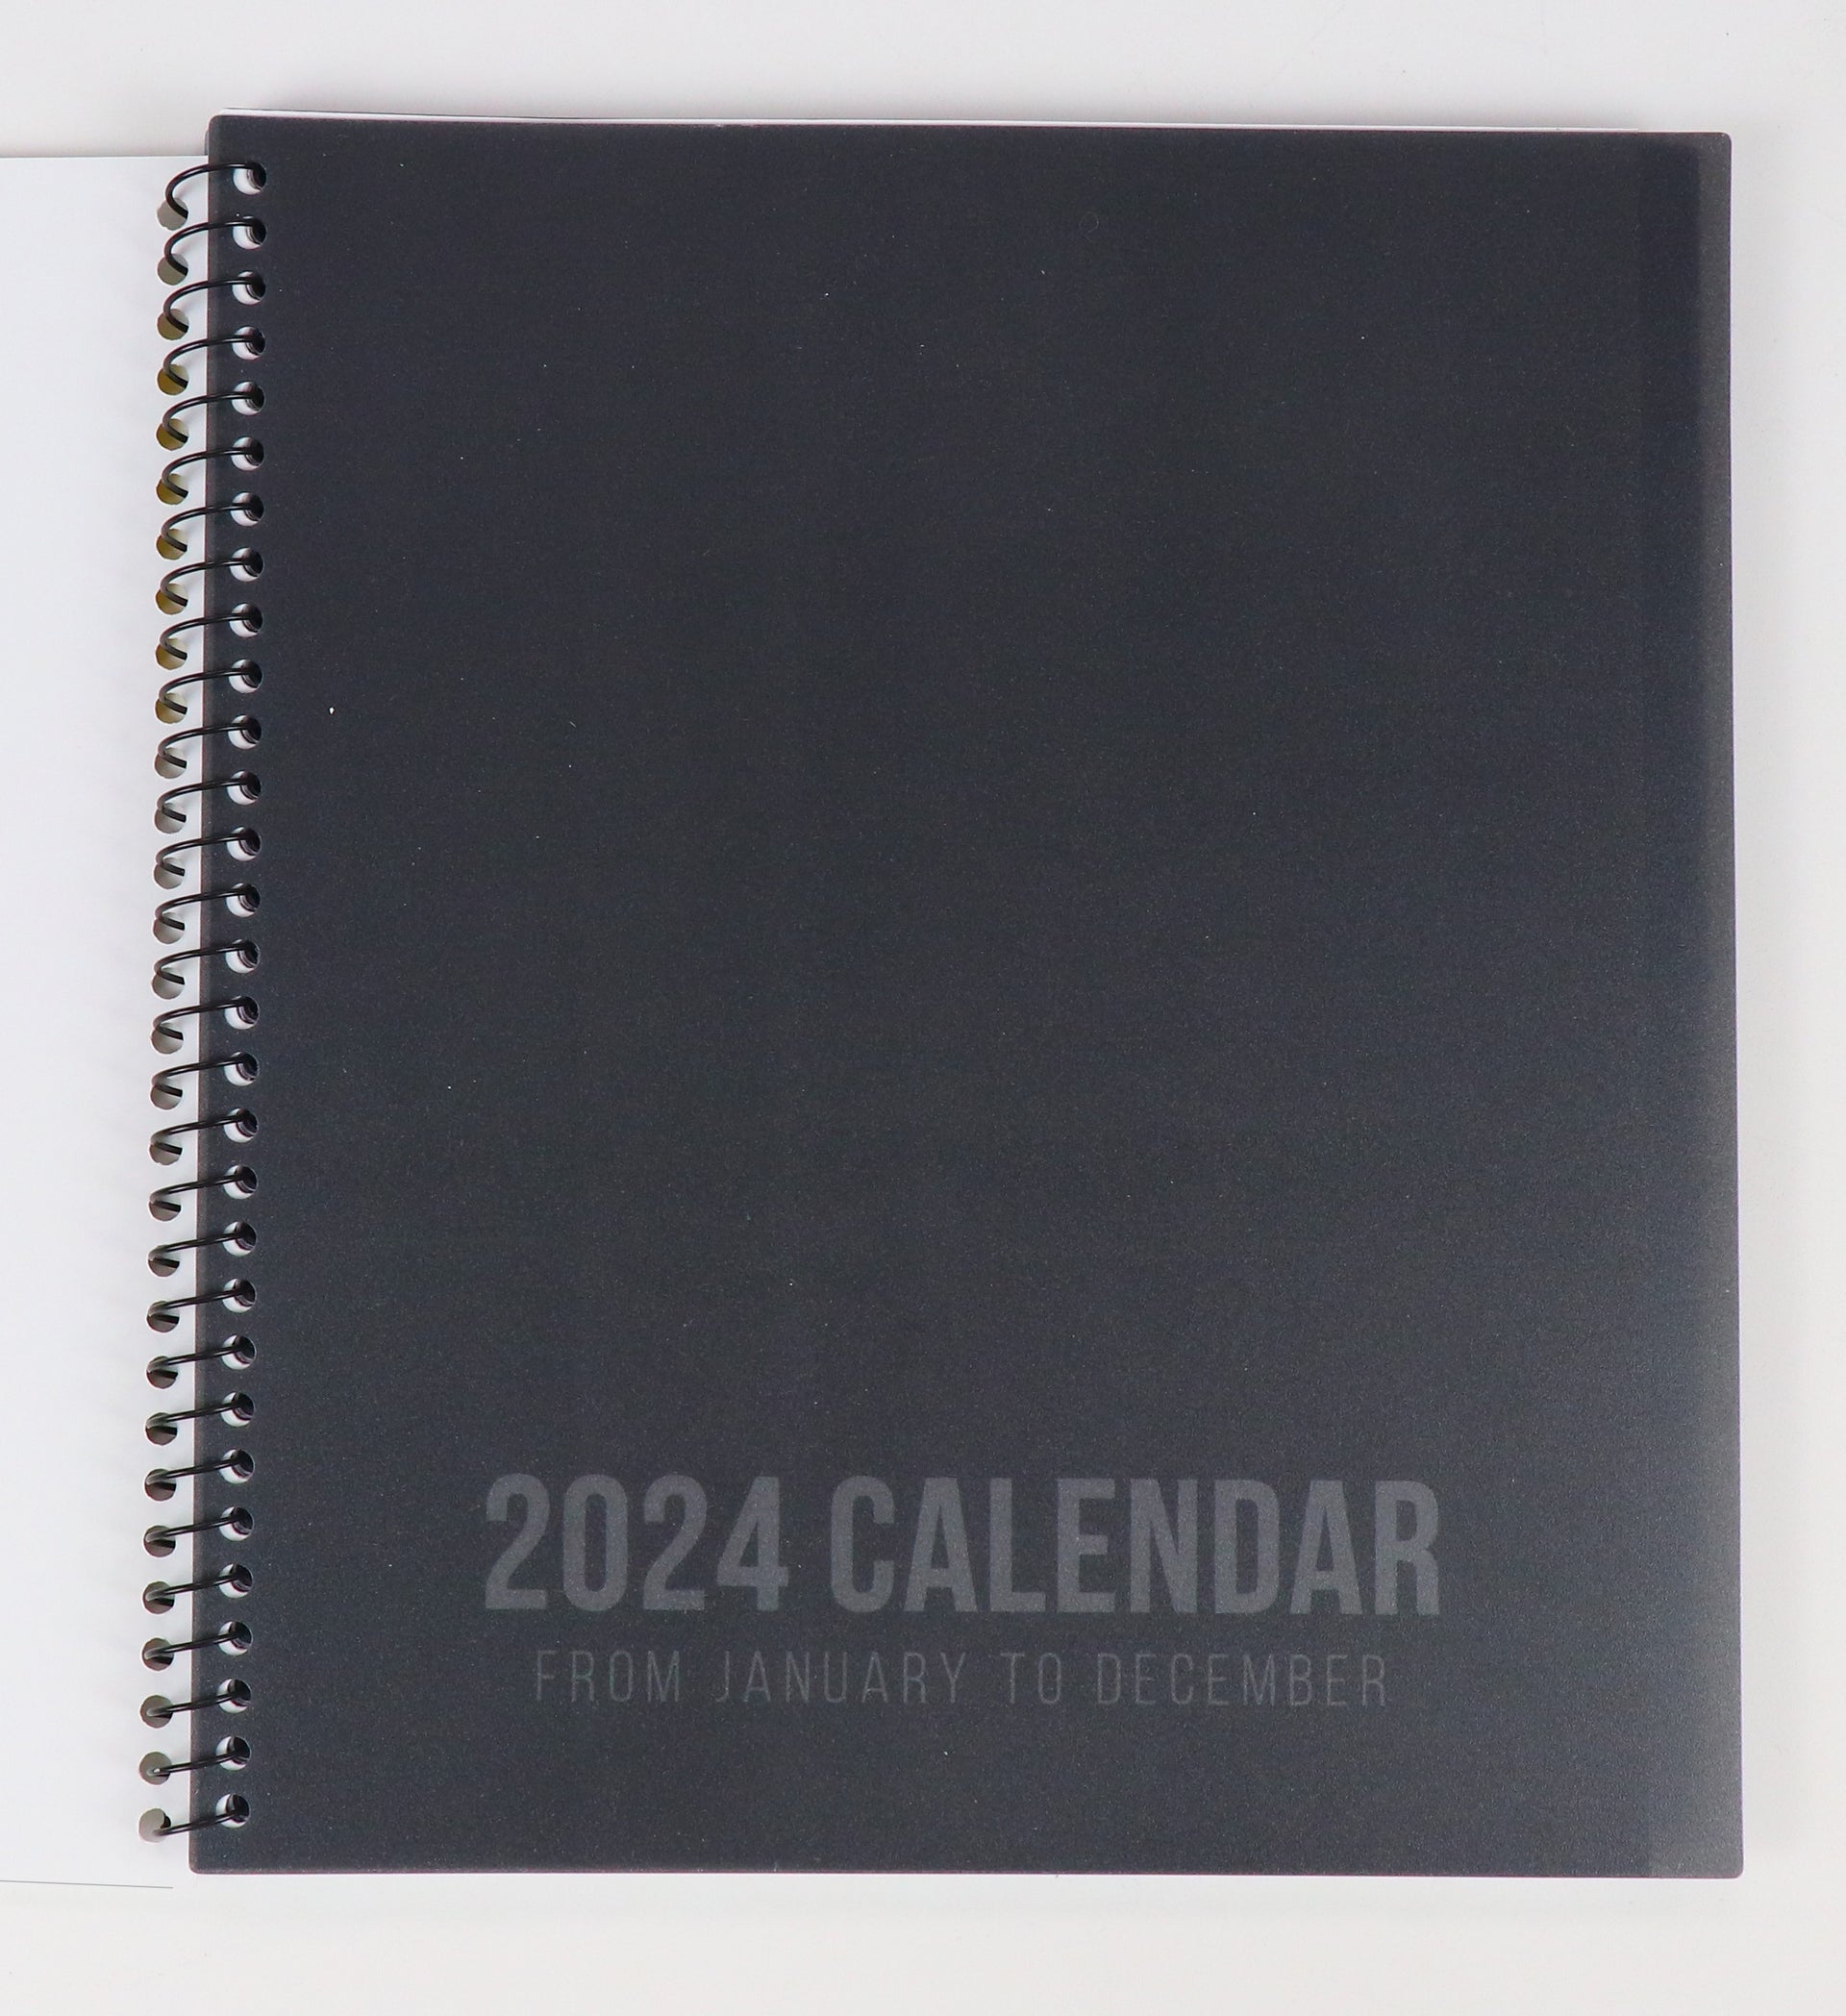 NOW 50% Off! RE-FOCUS THE CREATIVE OFFICE, 2024 Calendar, Monthly and Weekly Views with To-Do List